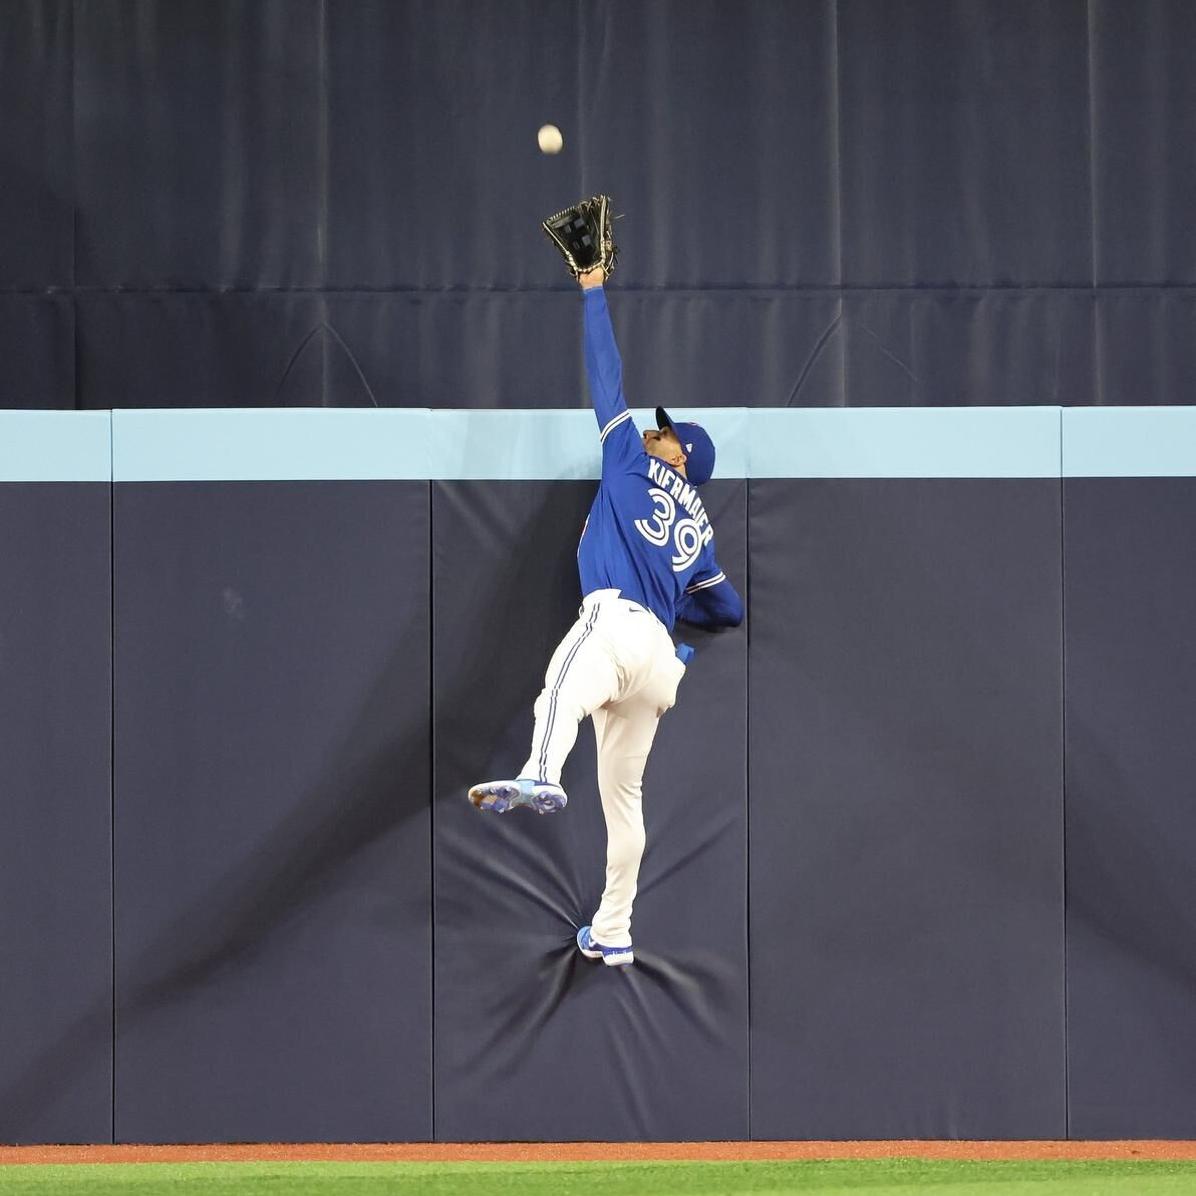 Photo: Blue Jays Makes Catch at the Wall Kevin Kiermaier